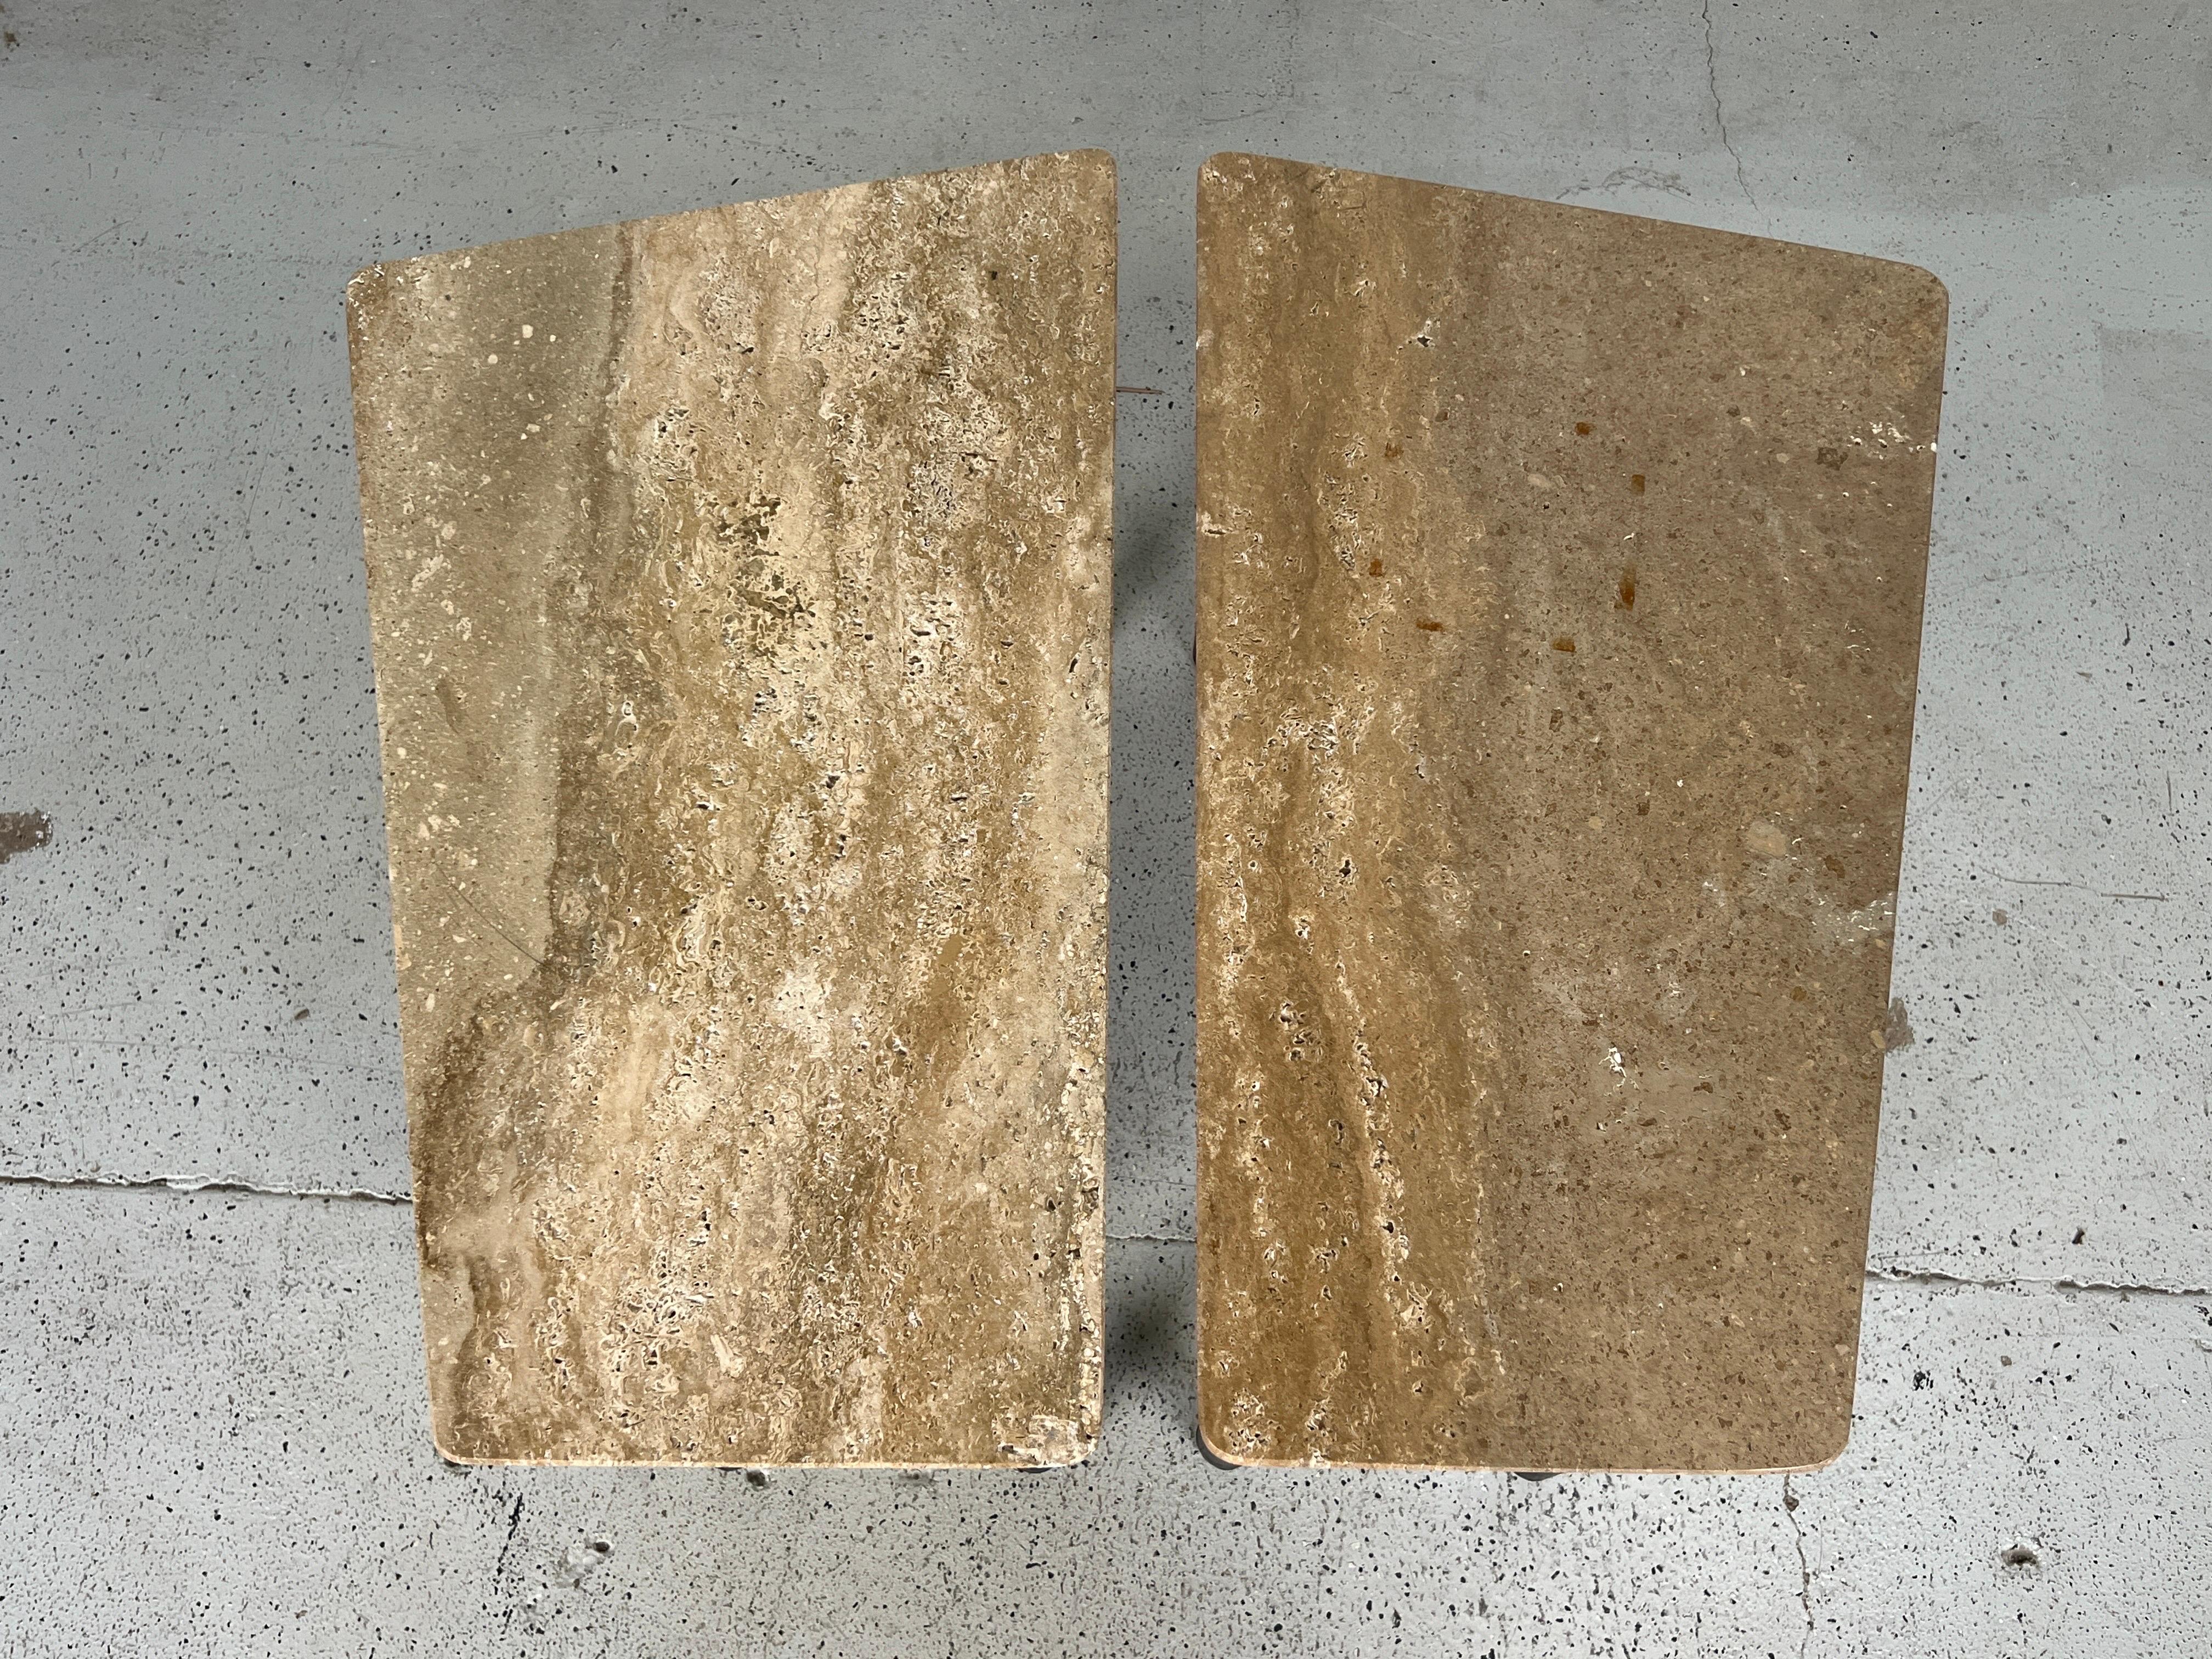 Pair of Wedge Shaped Travertine Tables by Edward Wormley for Dunbar For Sale 9